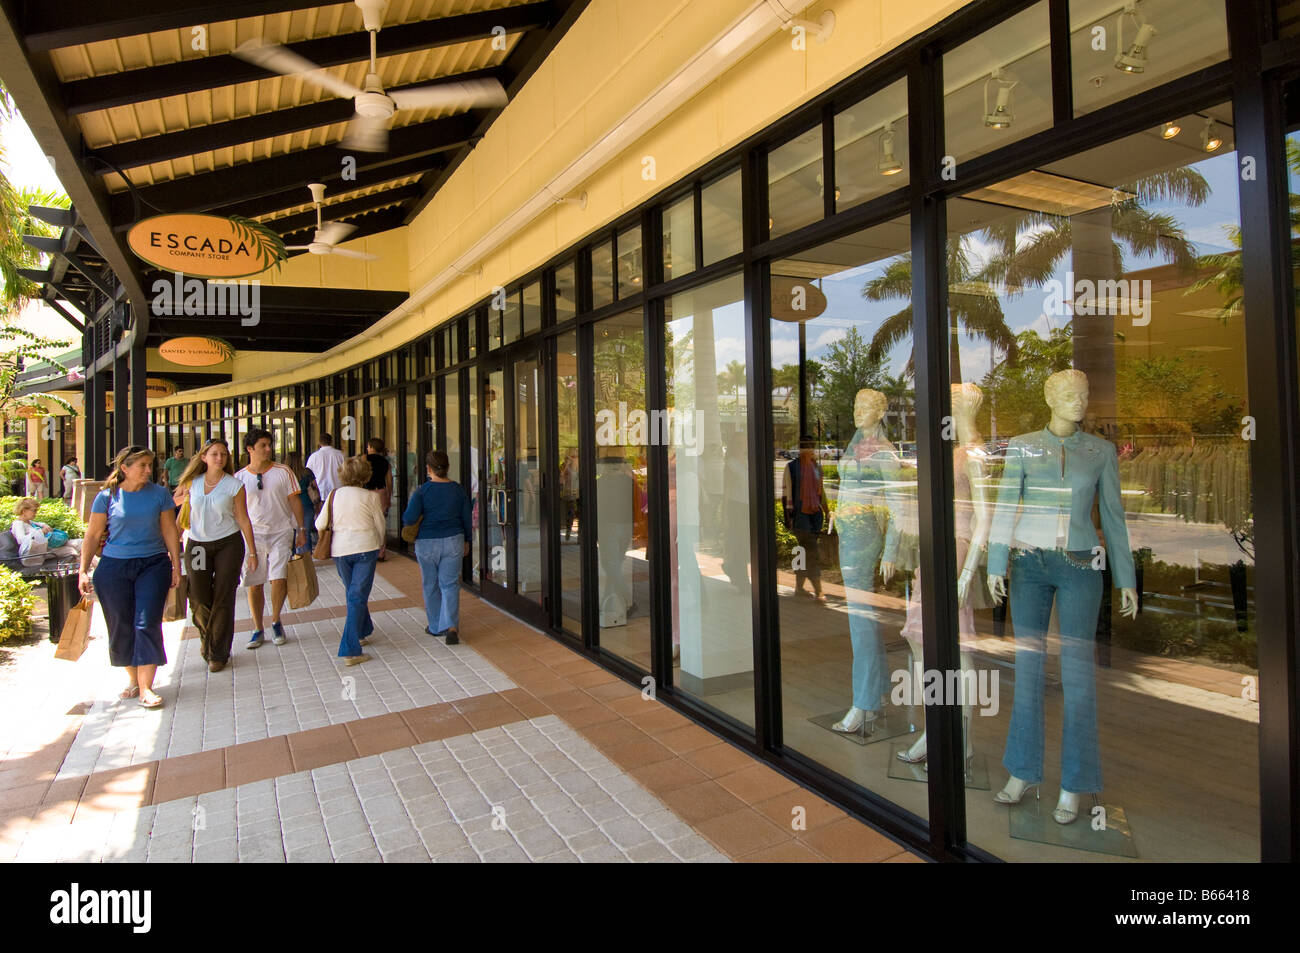 389 Sawgrass Mills Mall Stock Photos, High-Res Pictures, and Images - Getty  Images